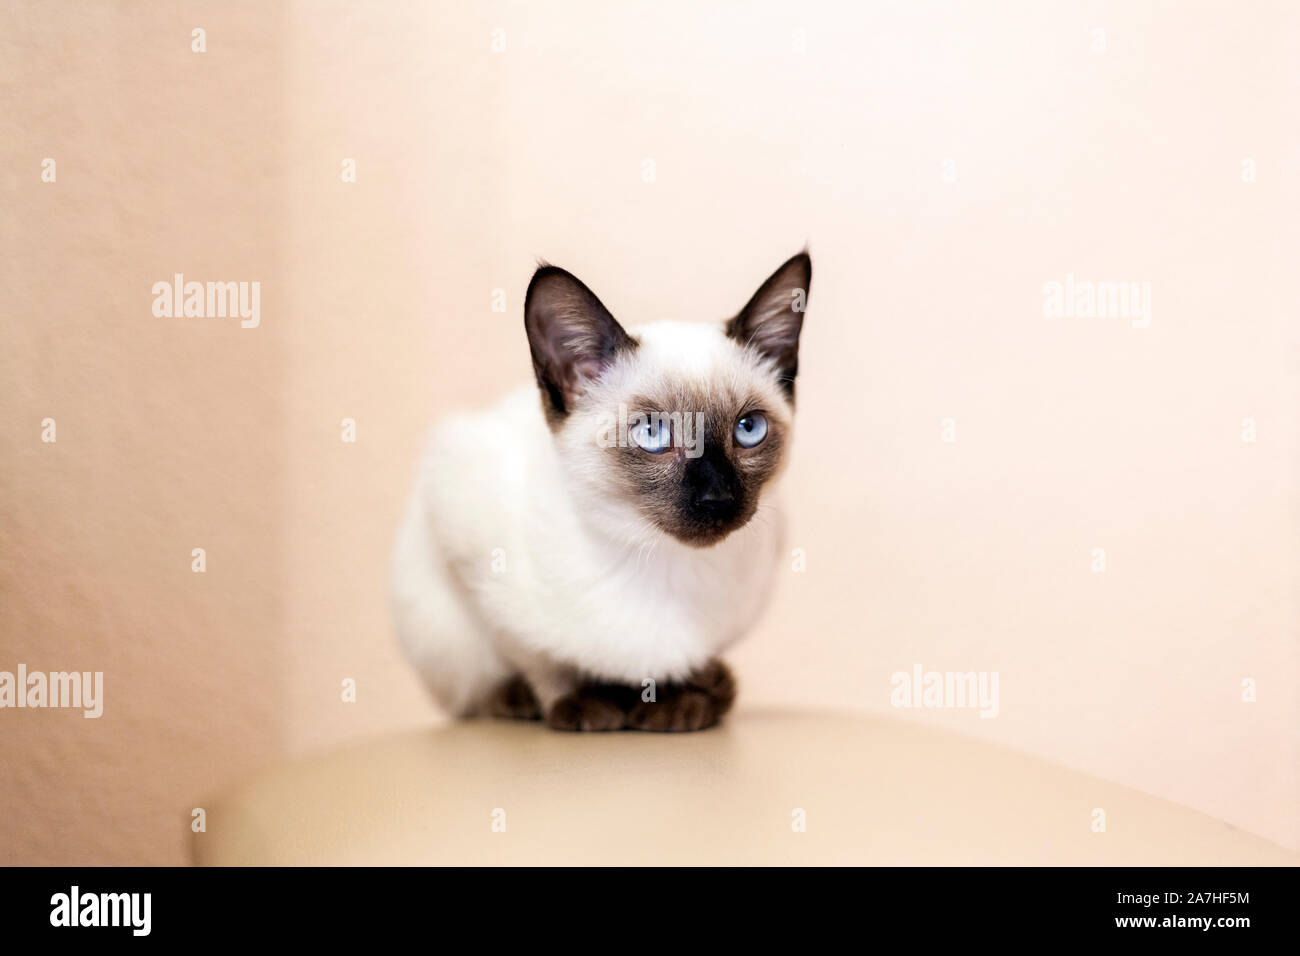 Pet Shop Cat High Resolution Stock Photography And Images Alamy